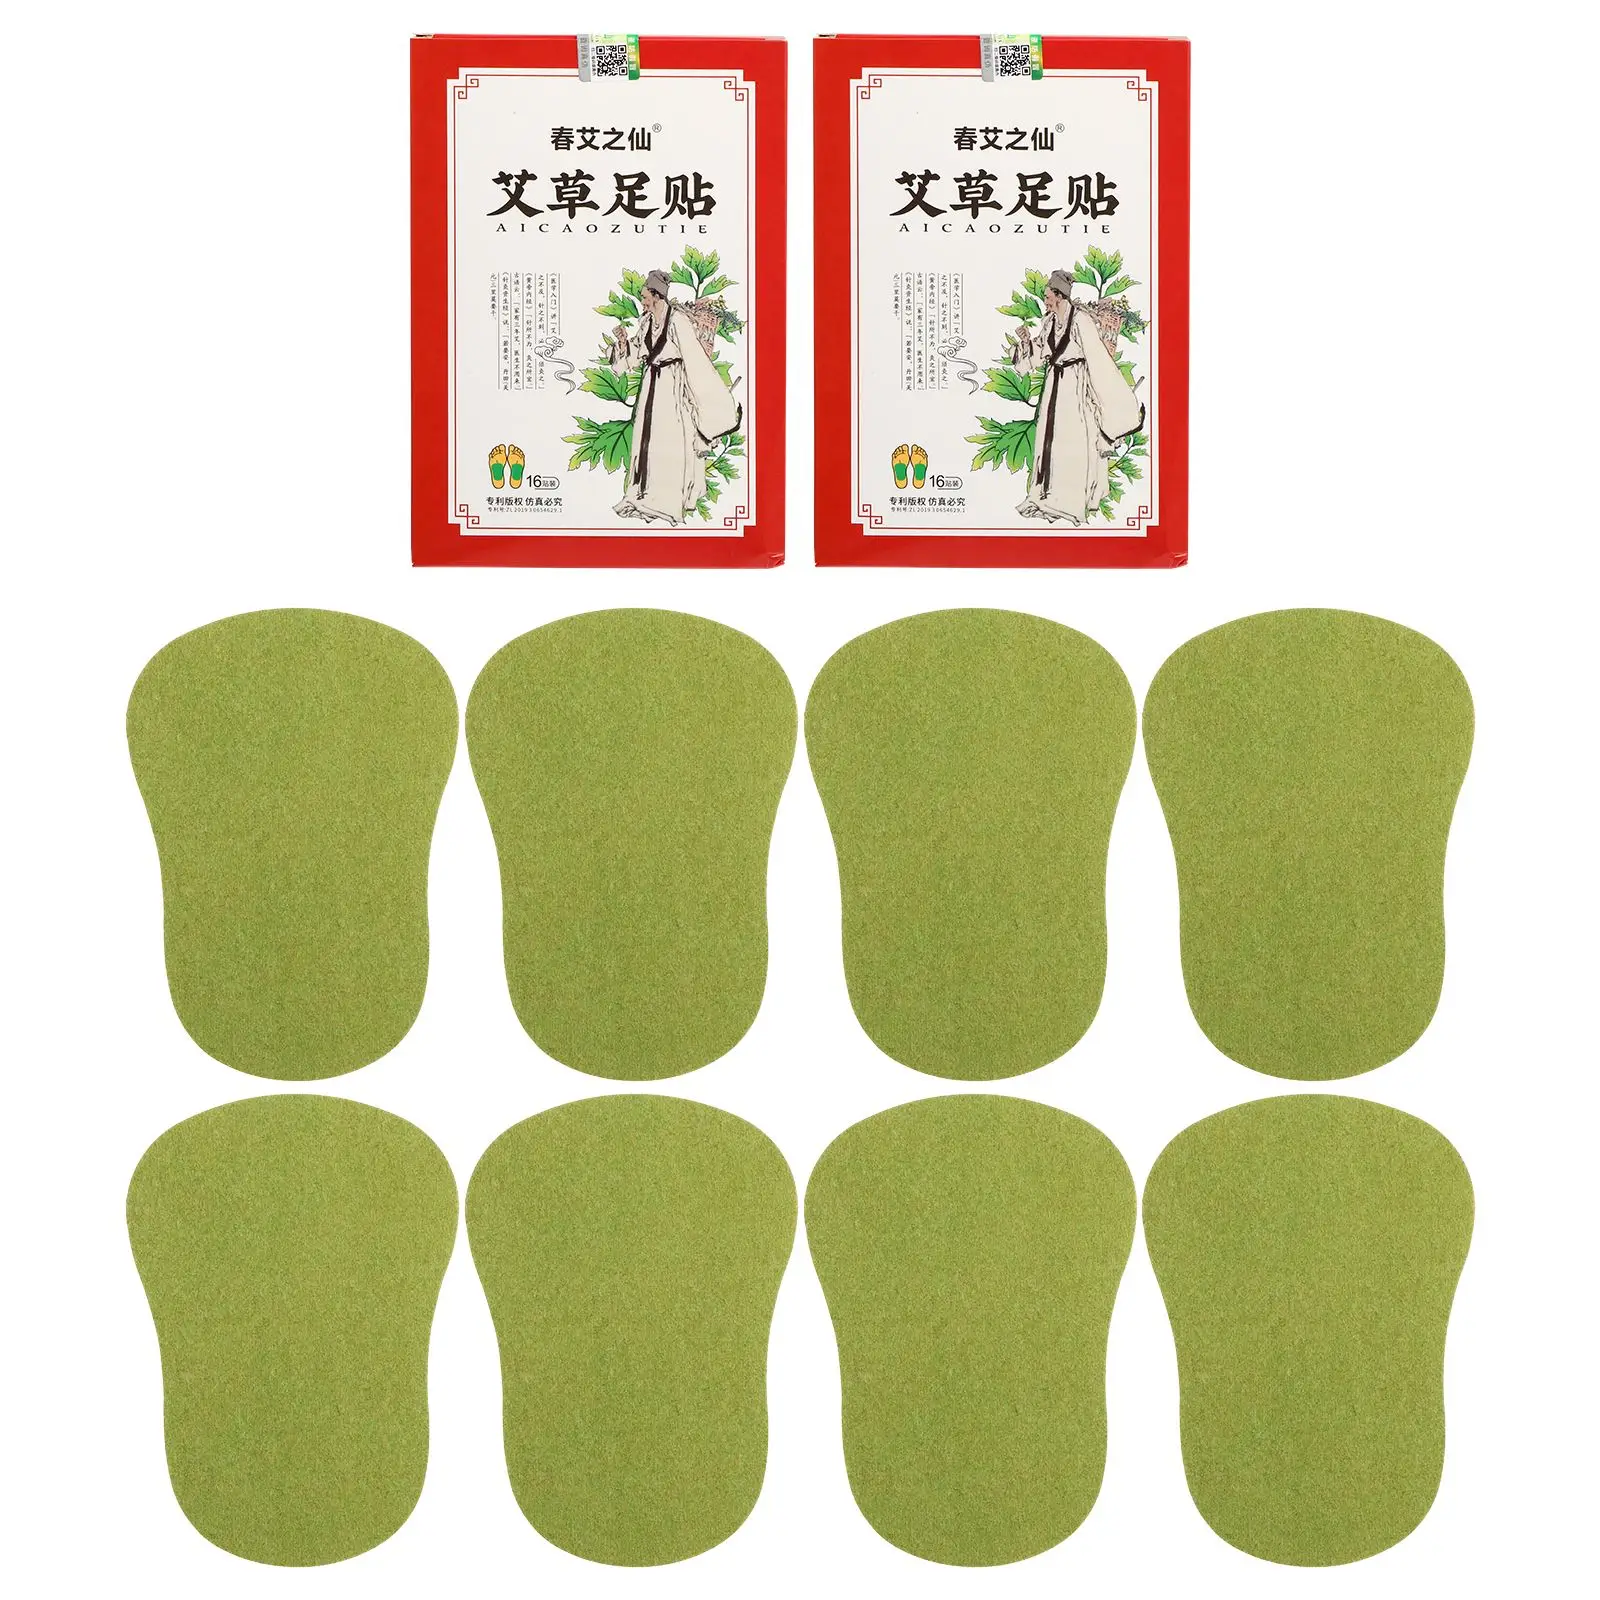 32pcs Natural Herbal Wormwood Artemisia Argyi Detox Foot Care Patche Pad Relieve Stress Help Sleeping Warm Foot Pad Patch